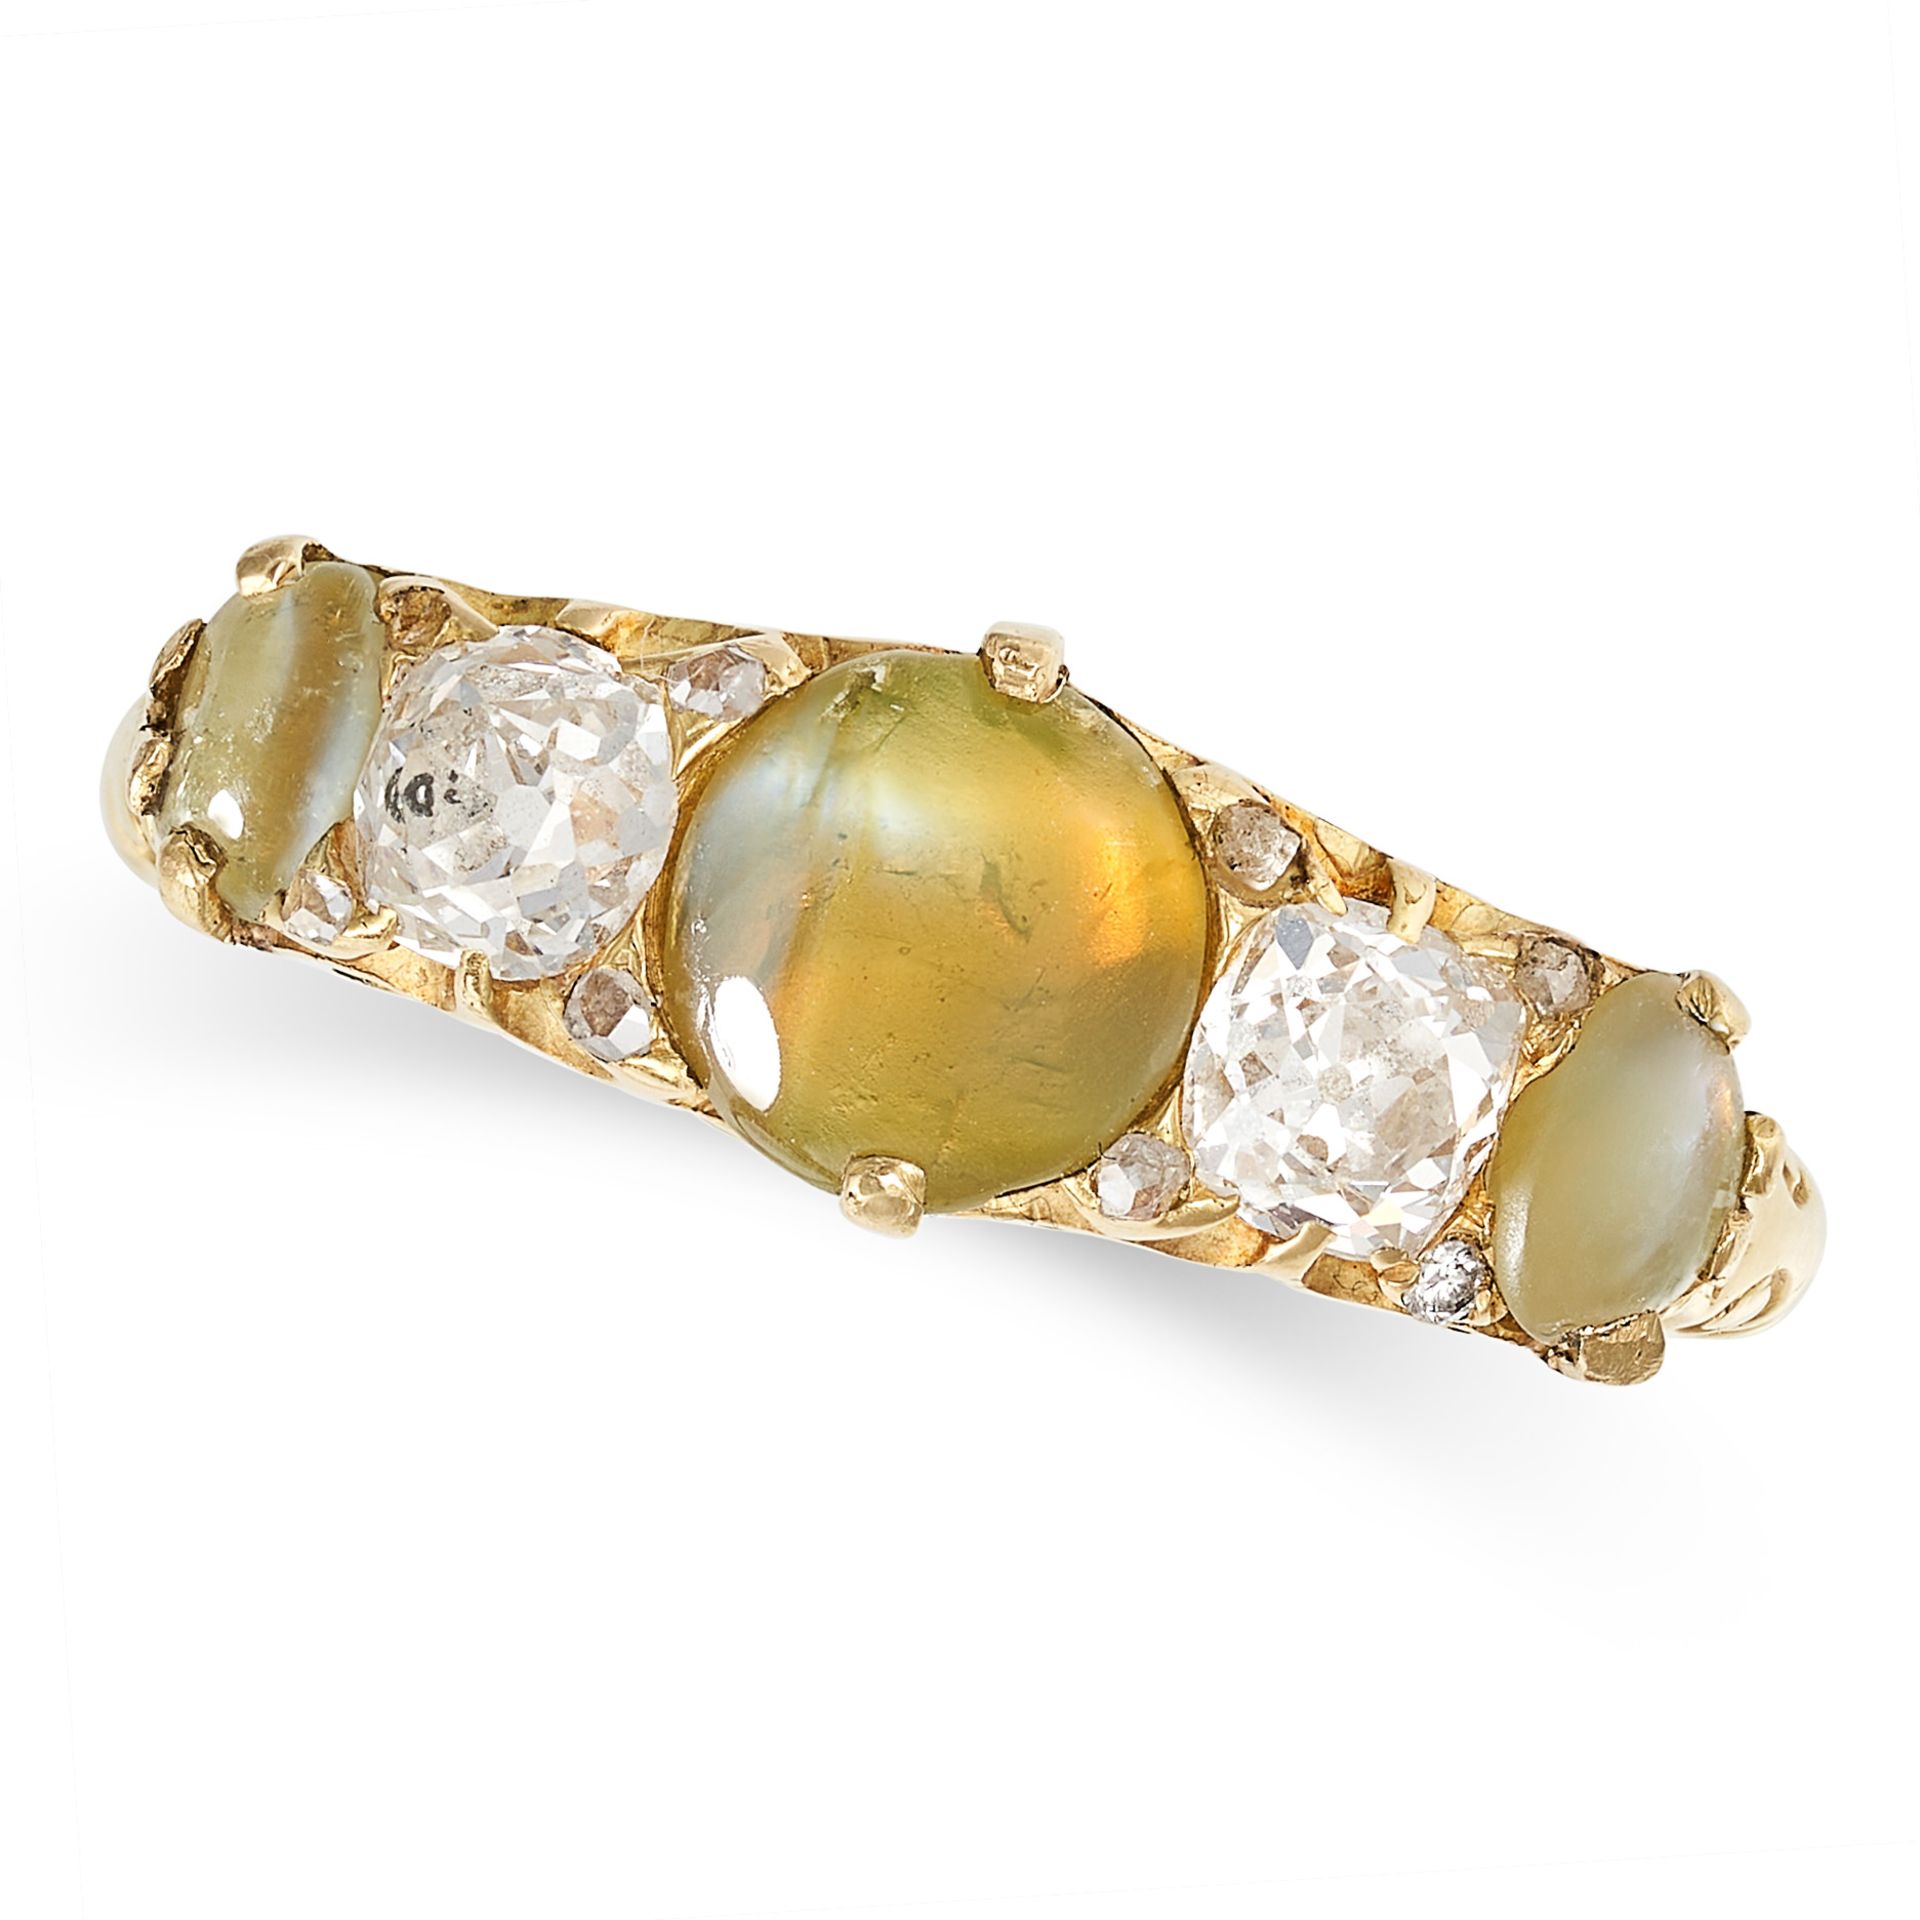 A VINTAGE CAT'S EYE CHRYSOBERYL AND DIAMOND RING in 18ct yellow gold, set with alternating caboc...